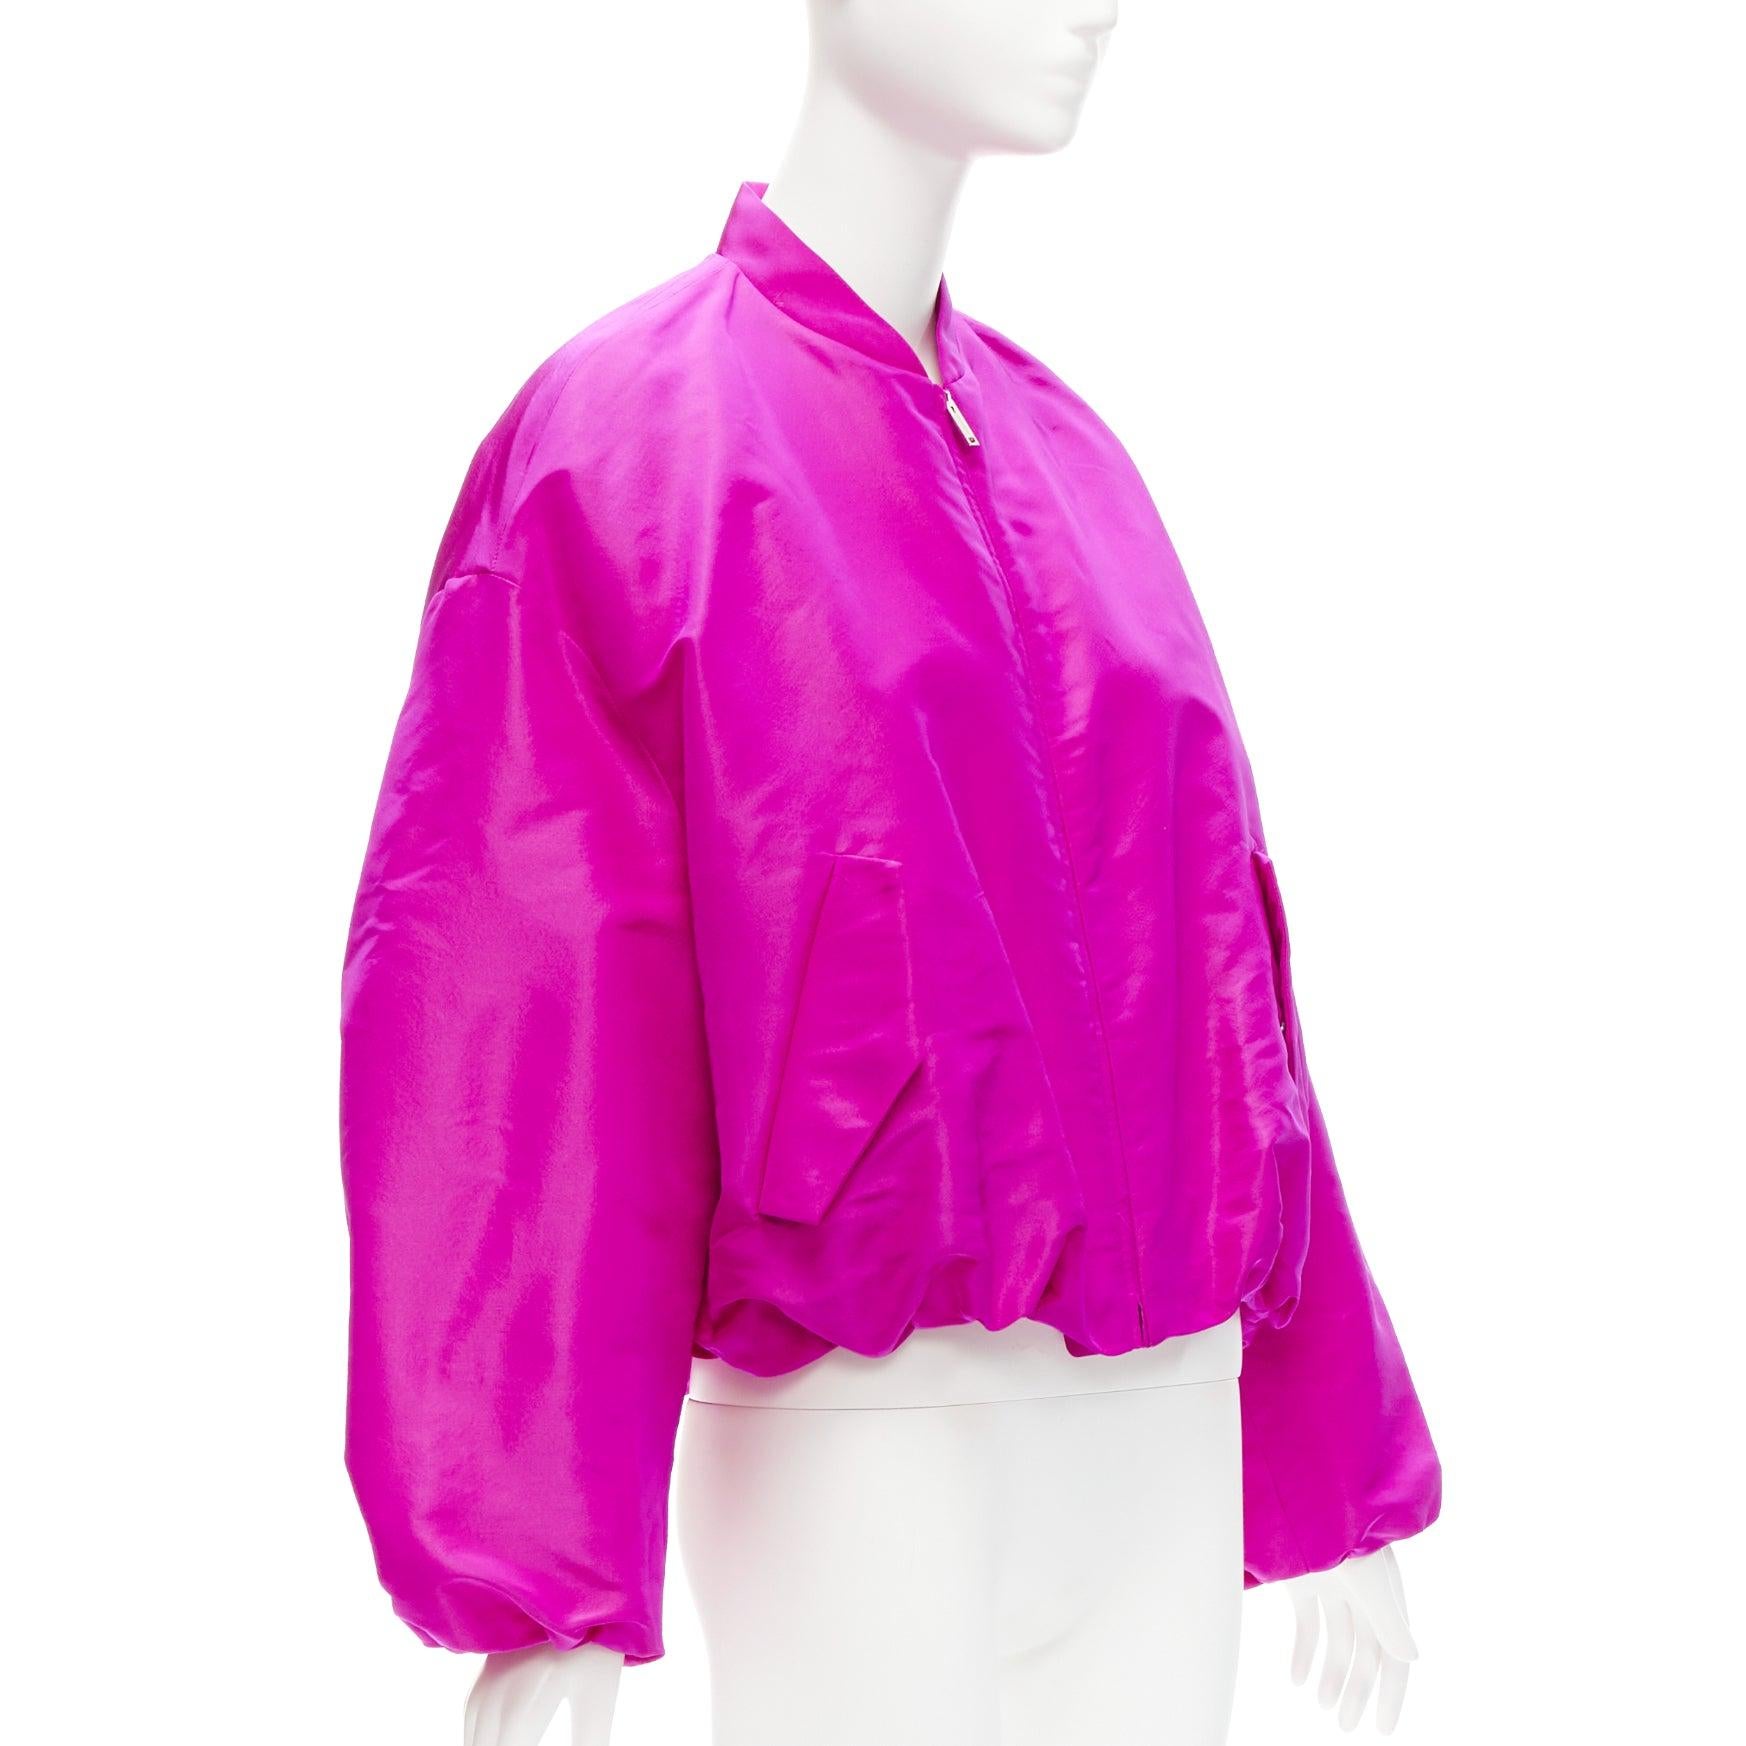 VALENTINO Runway PP Pink silk satin cocoon cropped bomber jacket blouson IT38 XS
Reference: AAWC/A00614
Brand: Valentino
Designer: Pier Paolo Piccioli
Collection: 2021 - Runway
Material: Silk
Color: Pink
Pattern: Solid
Closure: Zip
Lining: Pink